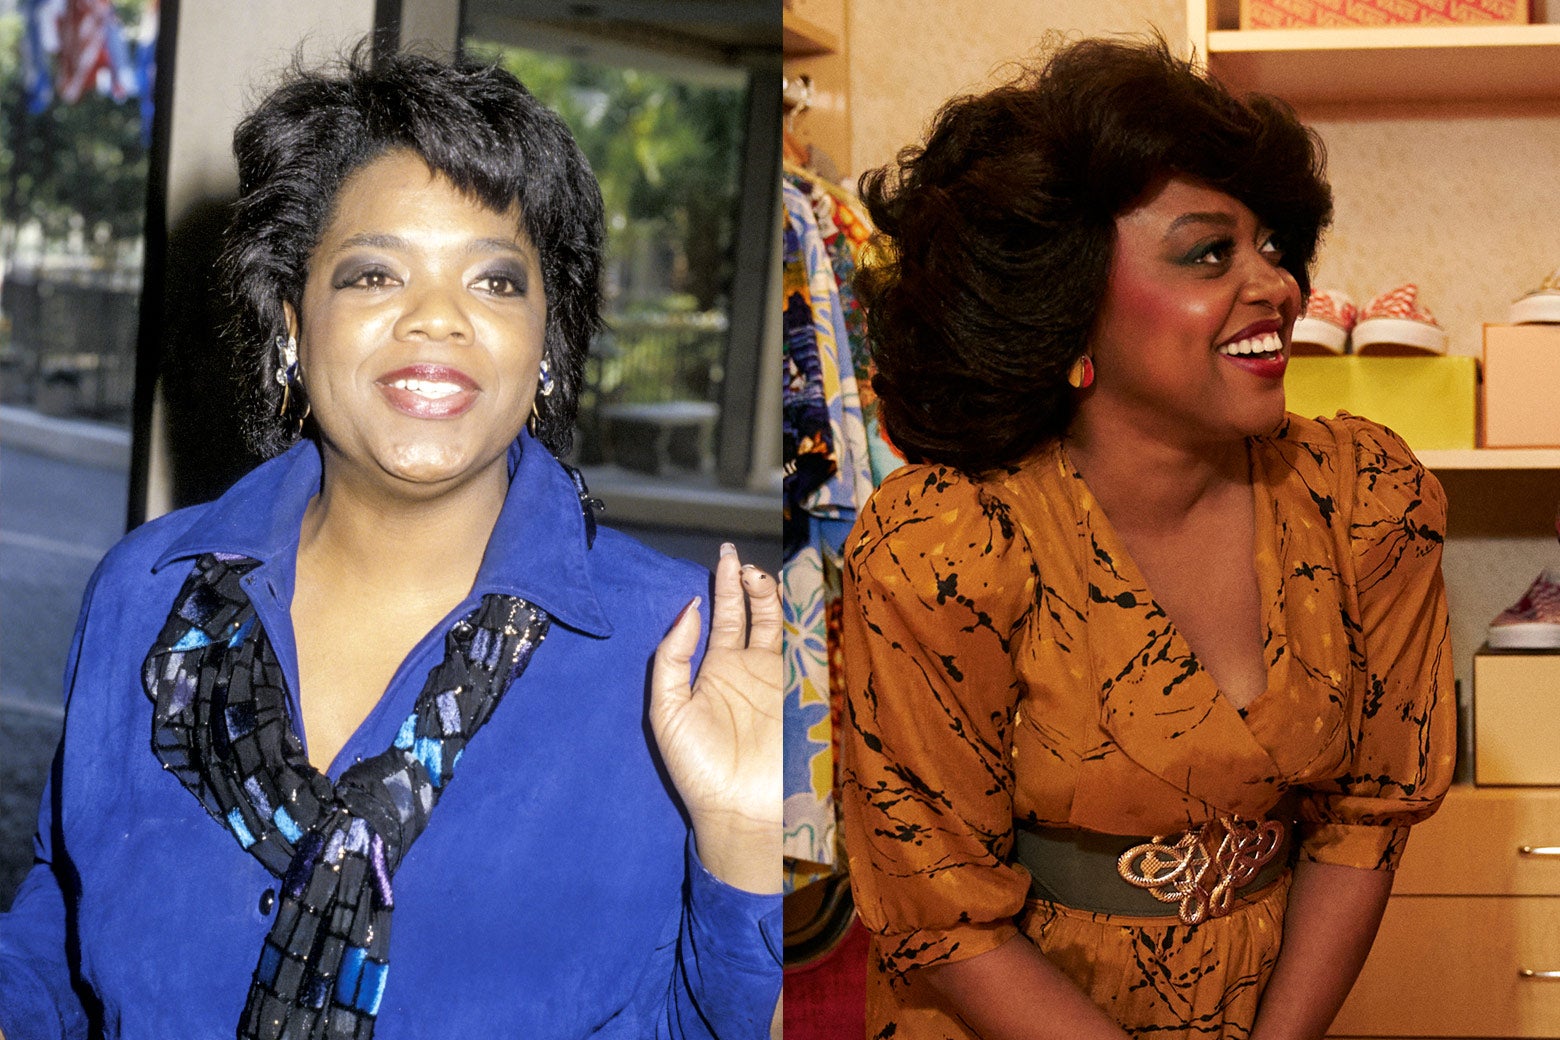 Winfrey's face is illuminated and she is waving. Brunson smiles at an unseen figure off camera. A row of brightly patterned shirts and a shelf with shoes on it can be seen behind her.